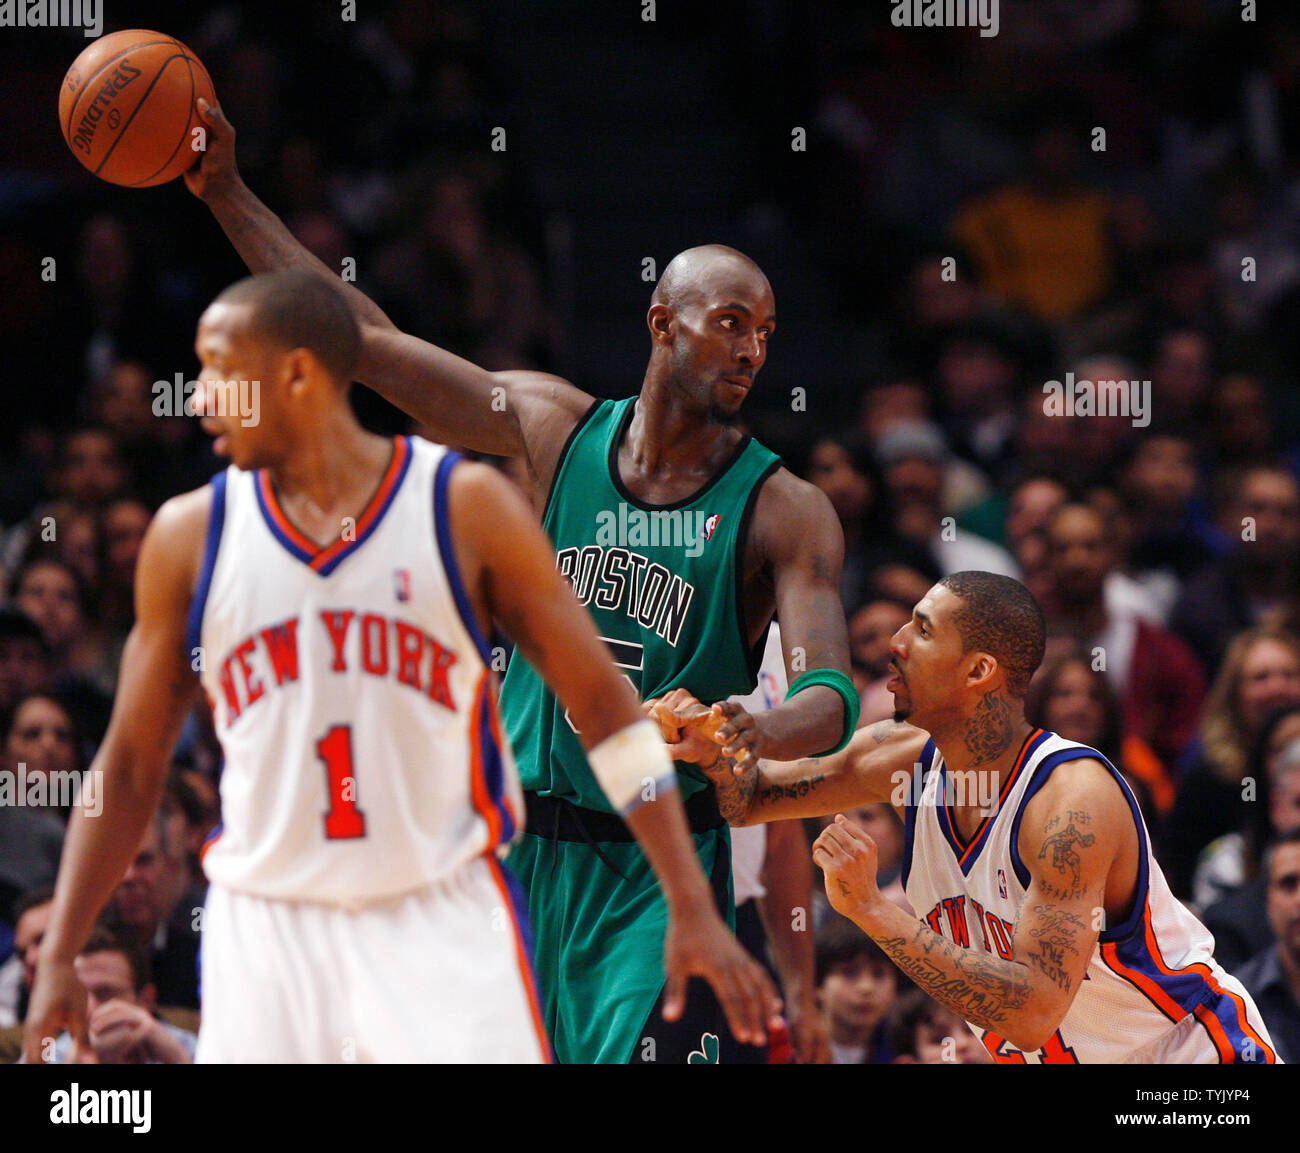 Boston Celtics Kevin Garnett (5) is defended by New York Knicks Wilson Chandler and Chris Duhon in the fourth quarter at Madison Square Garden in New York City on February 6, 2009. The Celtics defeated the Knicks 110-100.    (UPI Photo/John Angelillo) Stock Photo